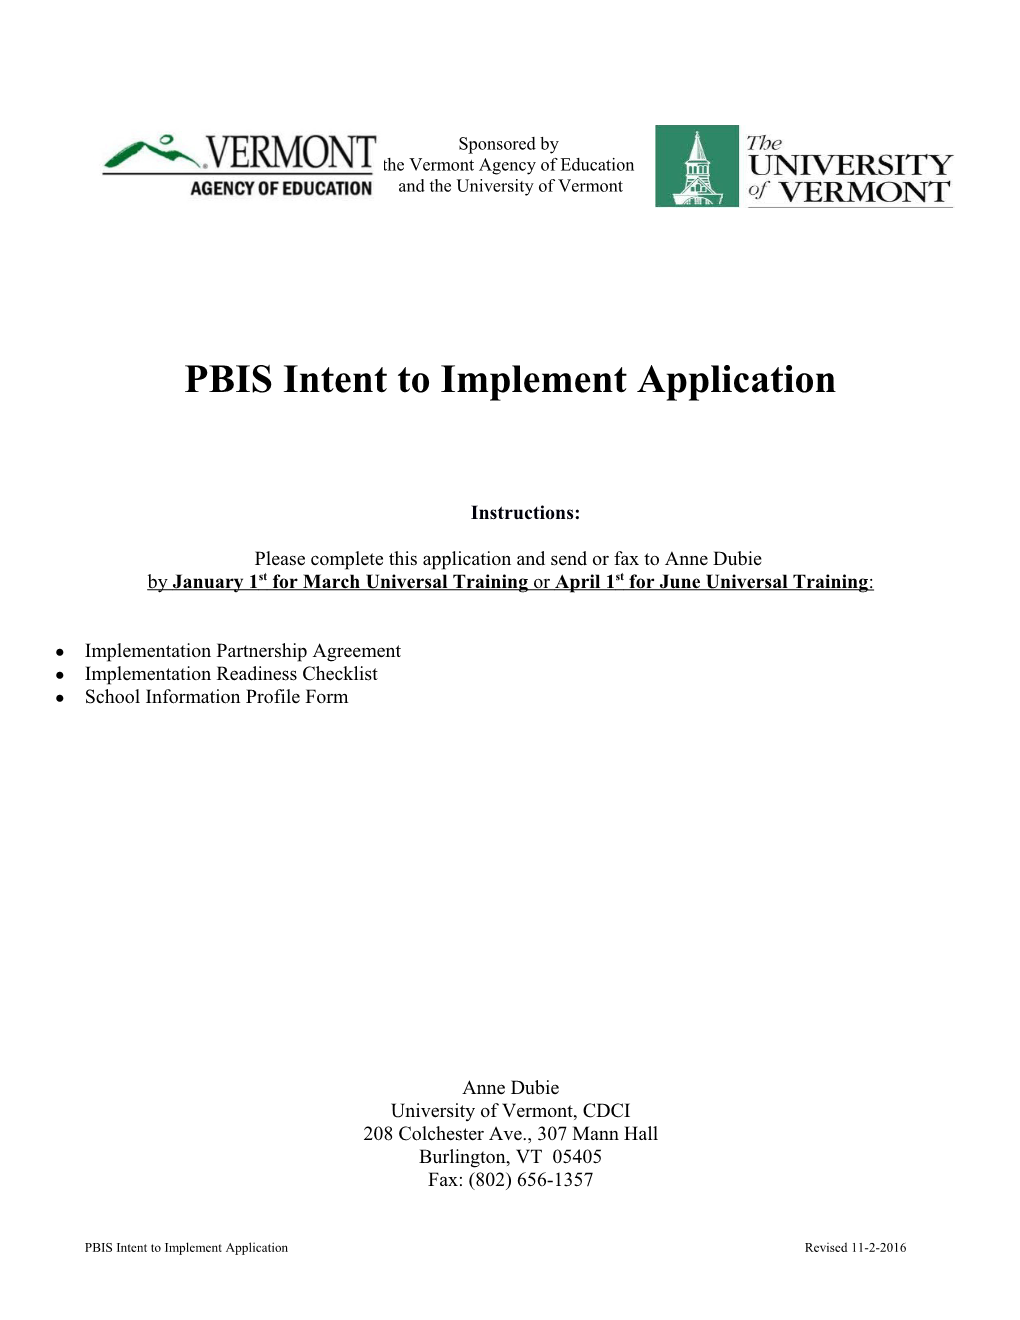 PBIS Intent to Implement Application